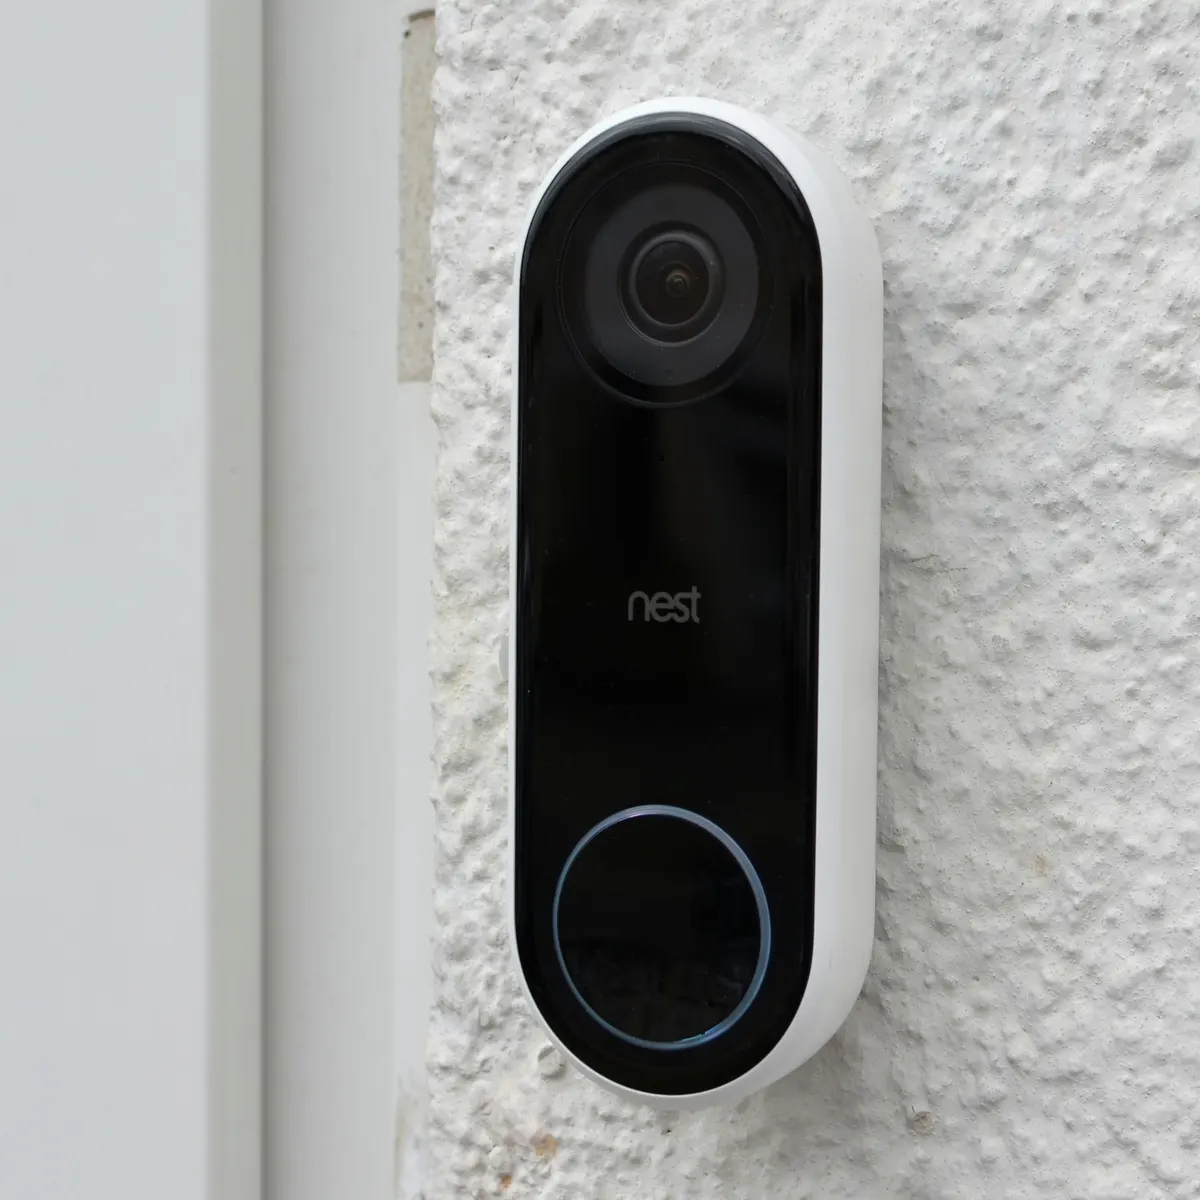 How Much Monthly Internet Data Does A Nest Video Doorbell Use